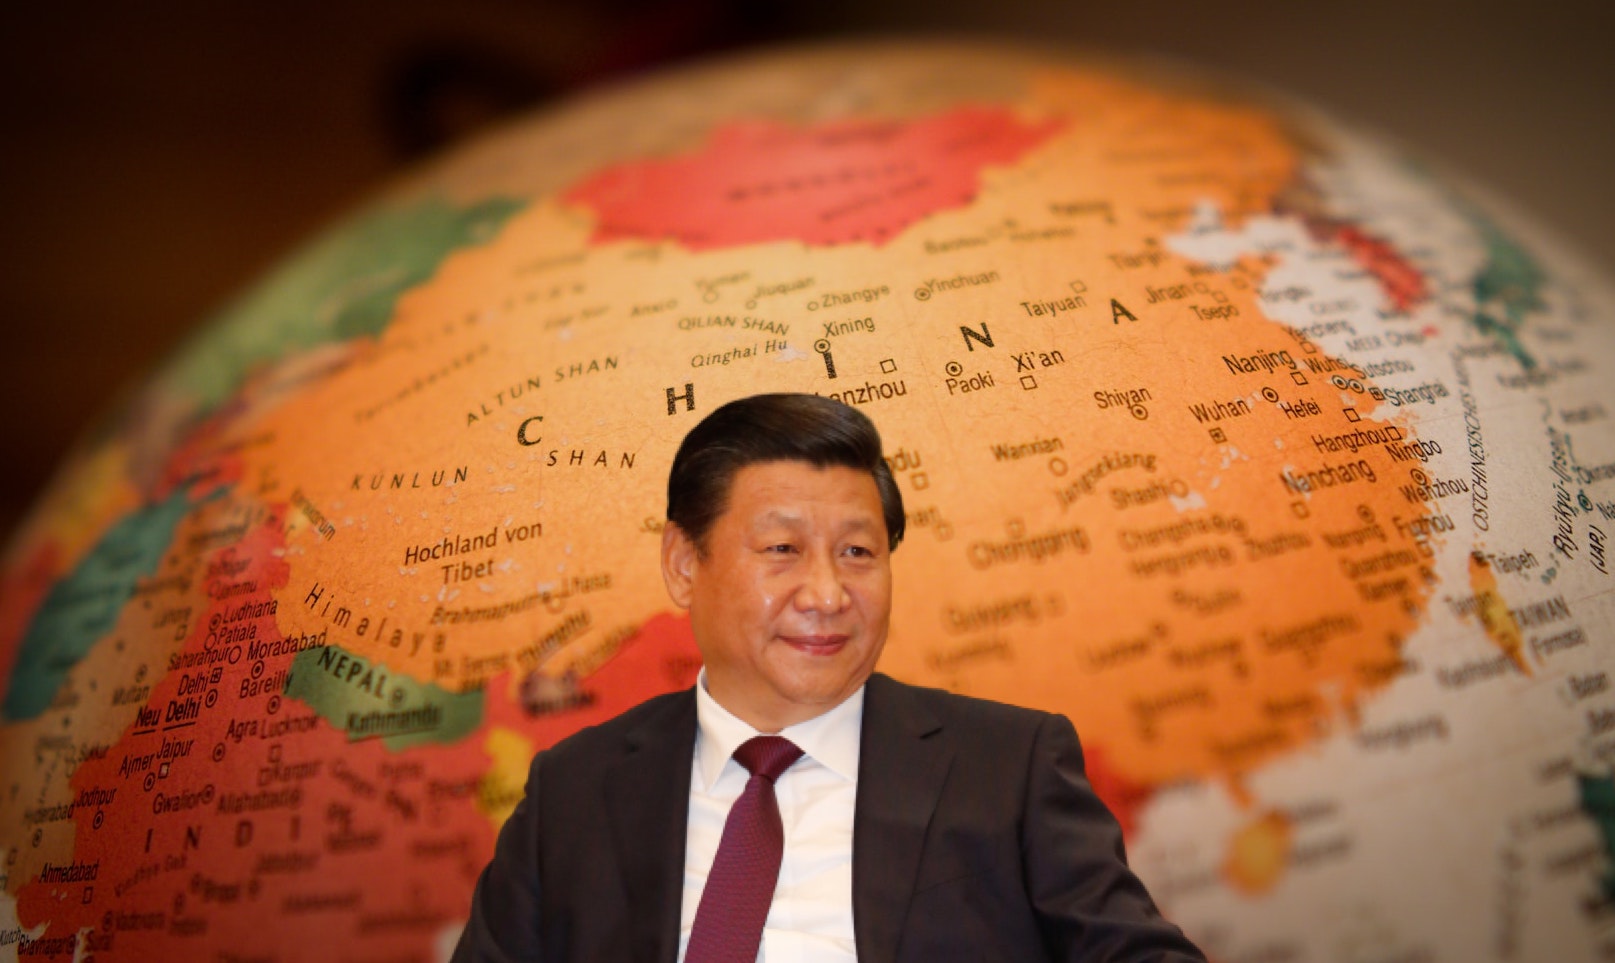 Congress Xi and the specter of separation between the United States and China.  Bremer writes